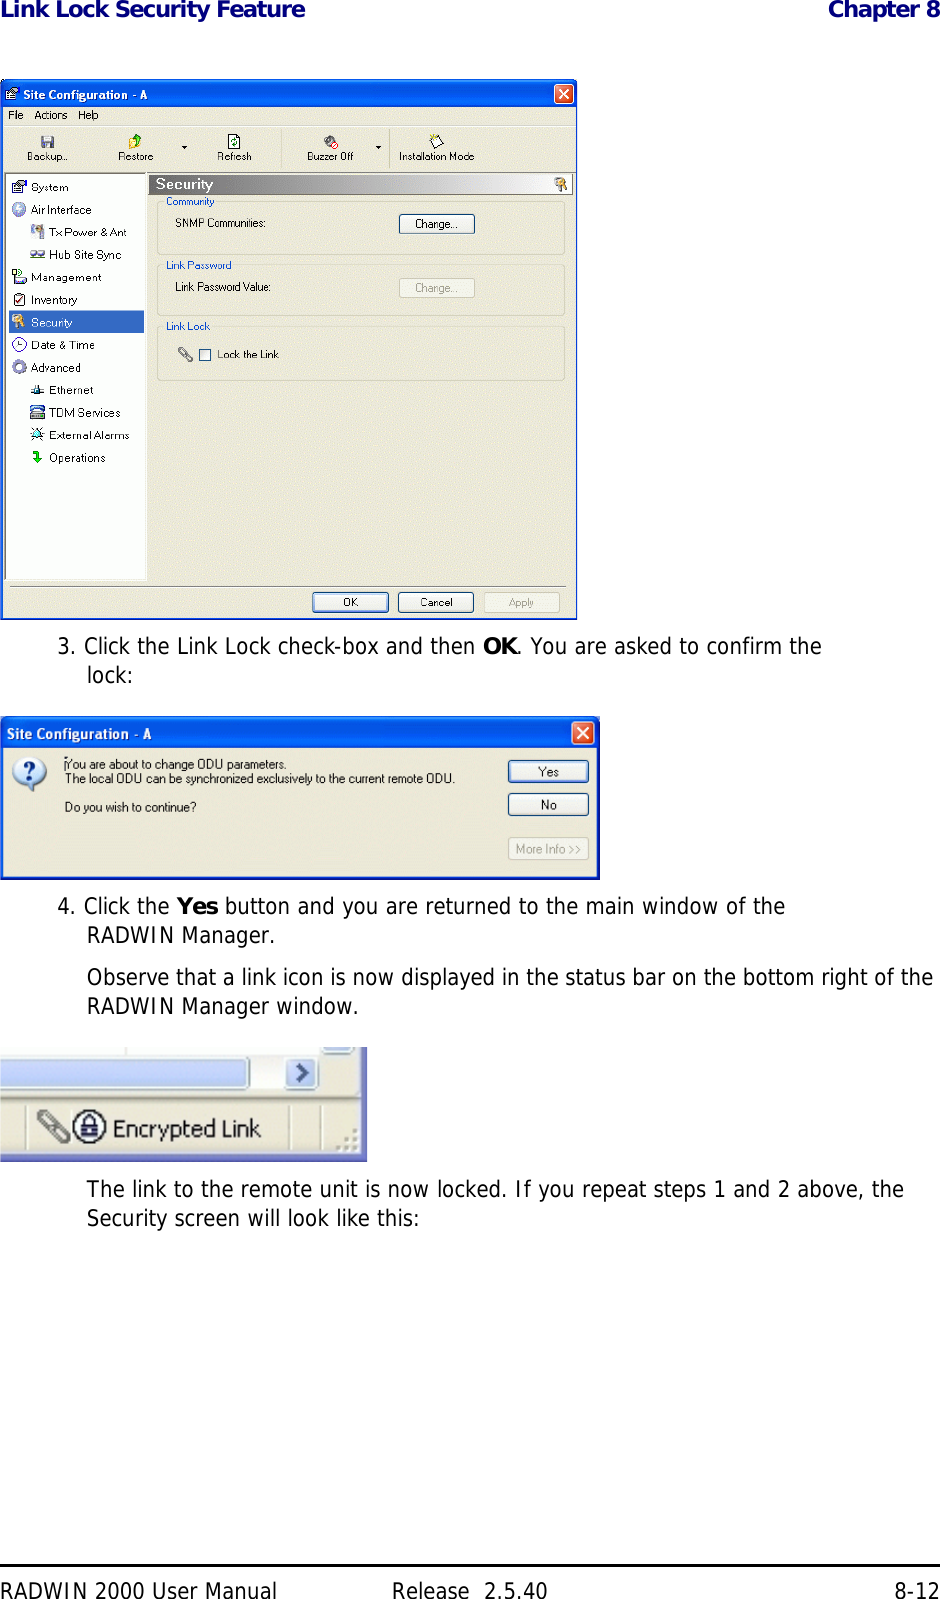 Link Lock Security Feature Chapter 8RADWIN 2000 User Manual Release  2.5.40 8-123. Click the Link Lock check-box and then OK. You are asked to confirm the lock:4. Click the Yes button and you are returned to the main window of the RADWIN Manager.Observe that a link icon is now displayed in the status bar on the bottom right of the RADWIN Manager window.The link to the remote unit is now locked. If you repeat steps 1 and 2 above, the Security screen will look like this: